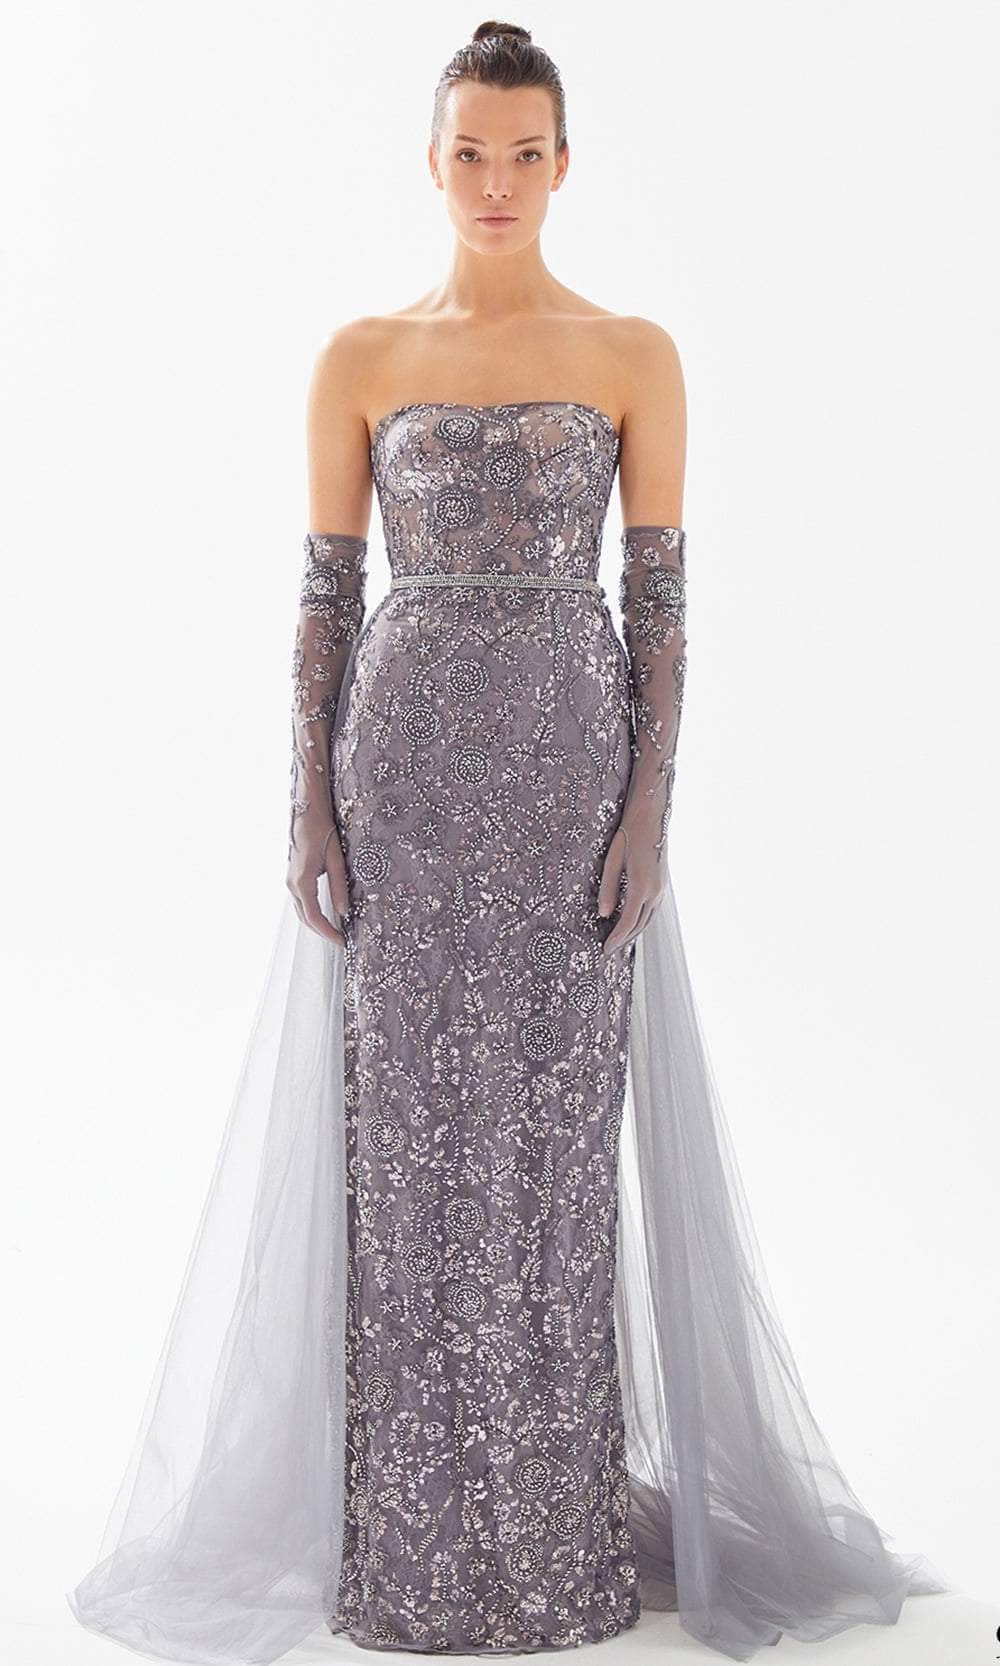 Image of Tarik Ediz 98312 - Beaded Embroidered Lace Evening Gown